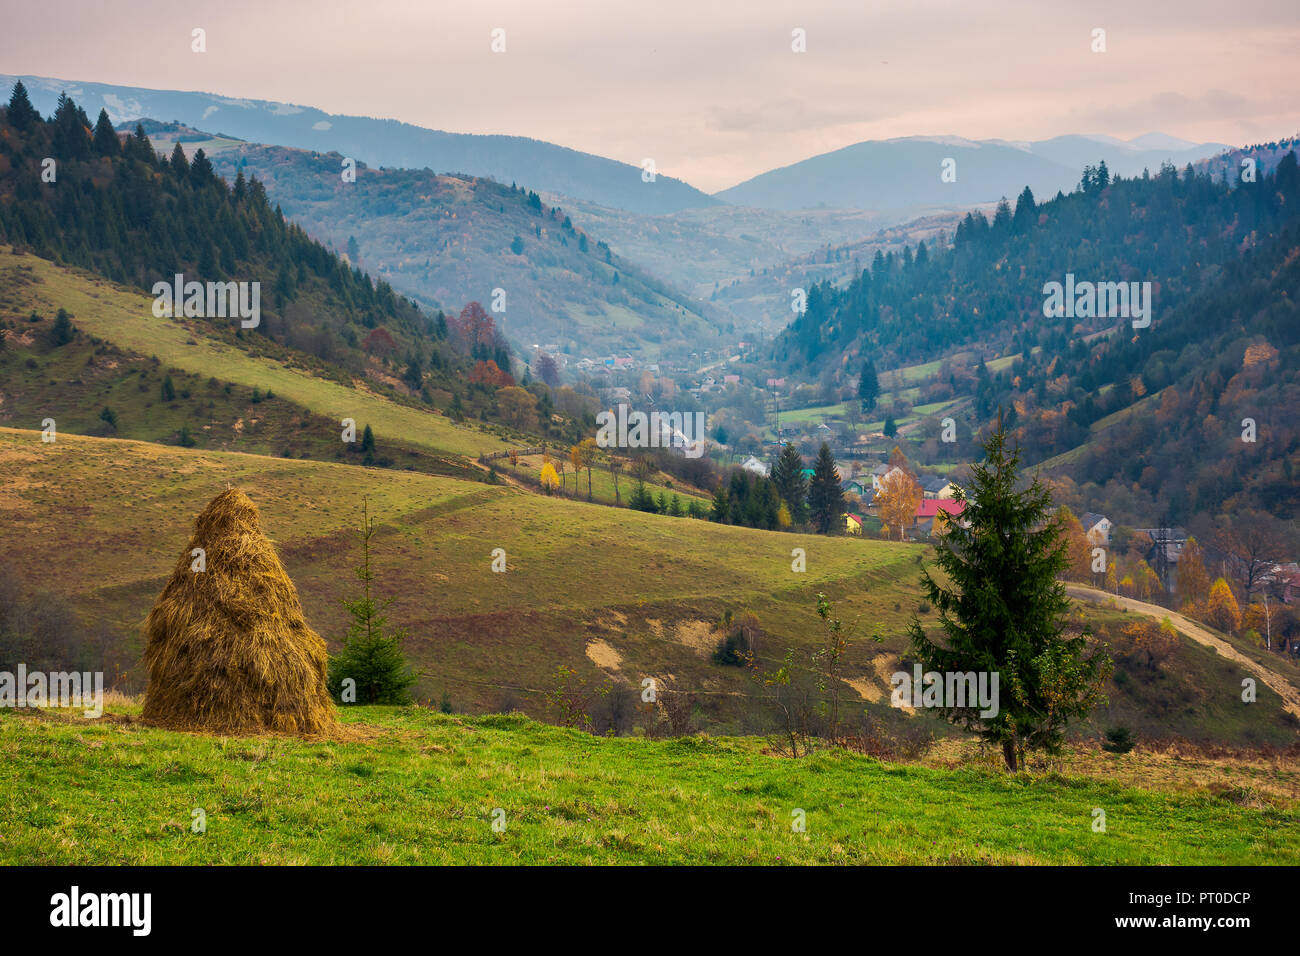 lovely countryside in mountains on a gloomy day. village down in the valley. huge ridge in the distance. Stock Photo